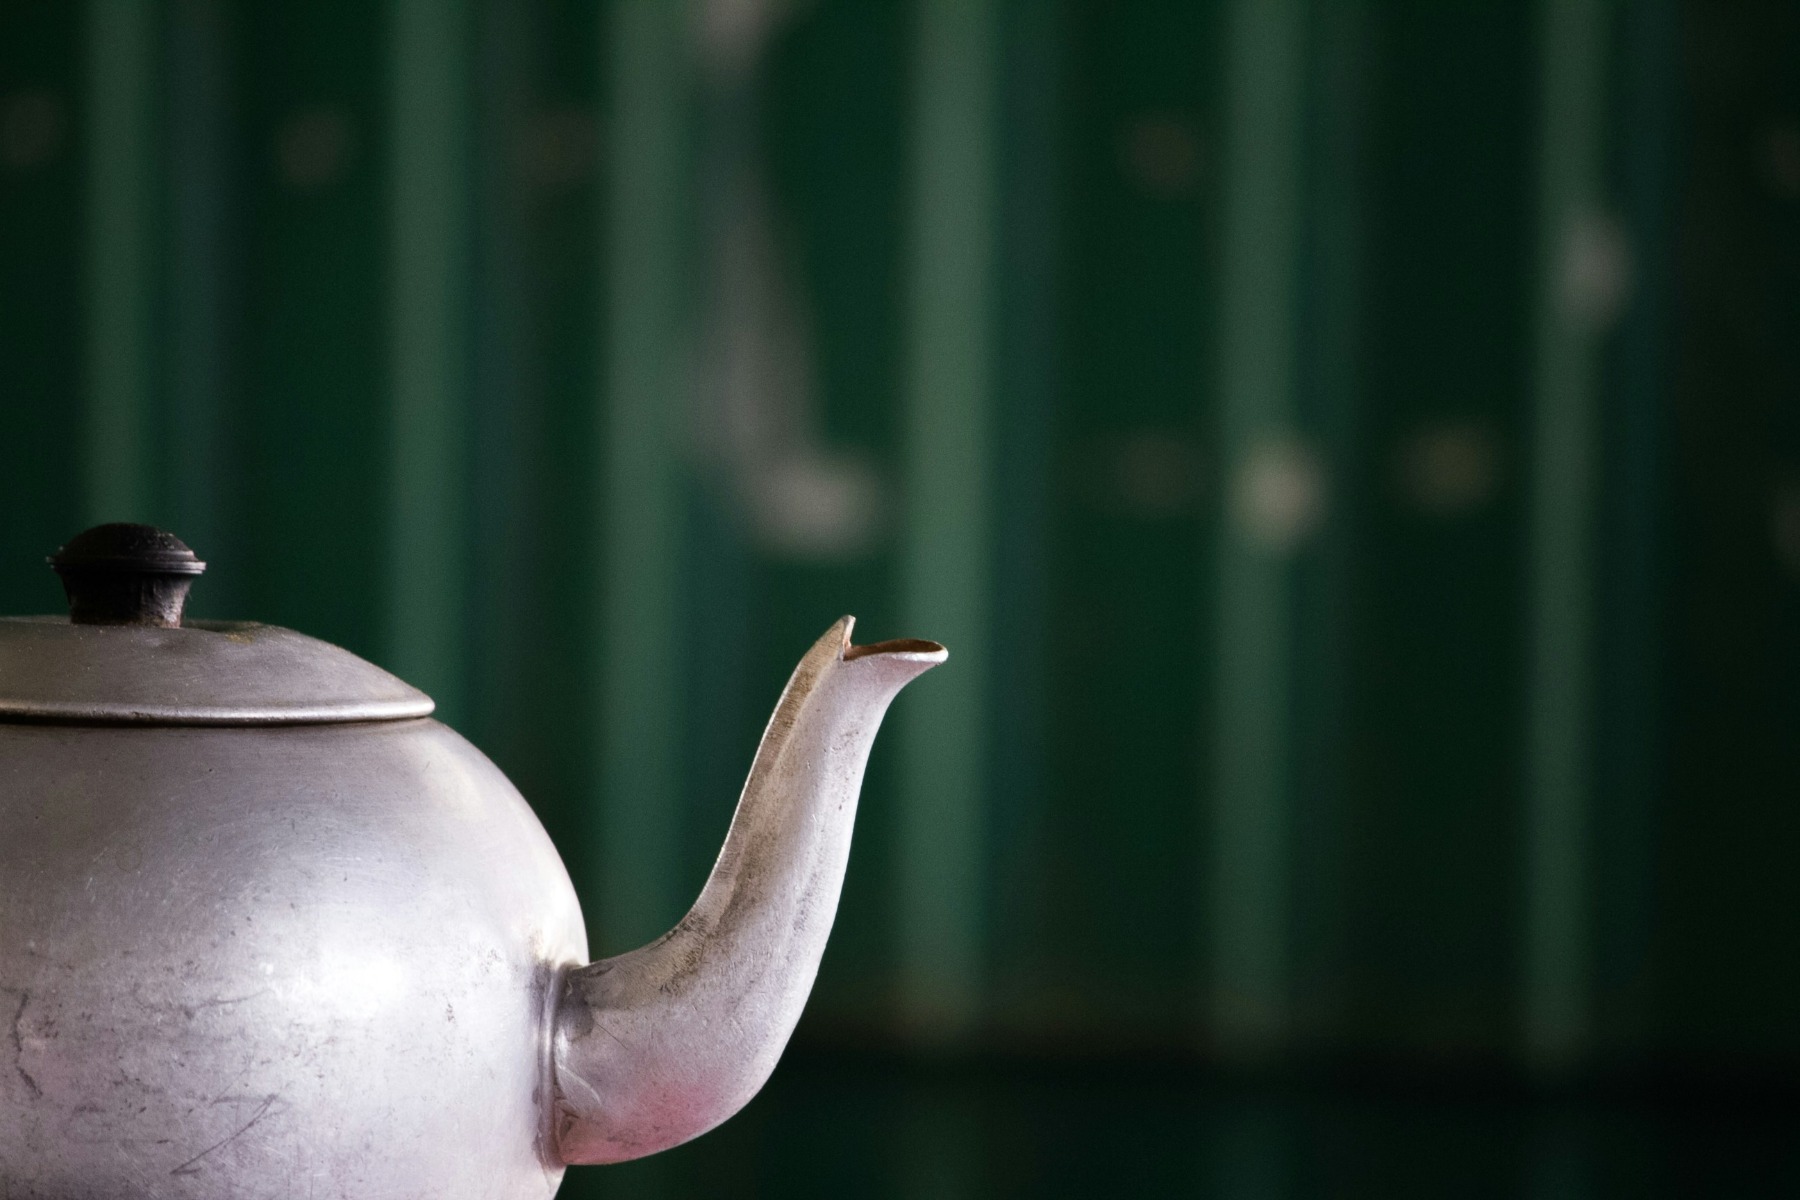 Metal kettle with a green background